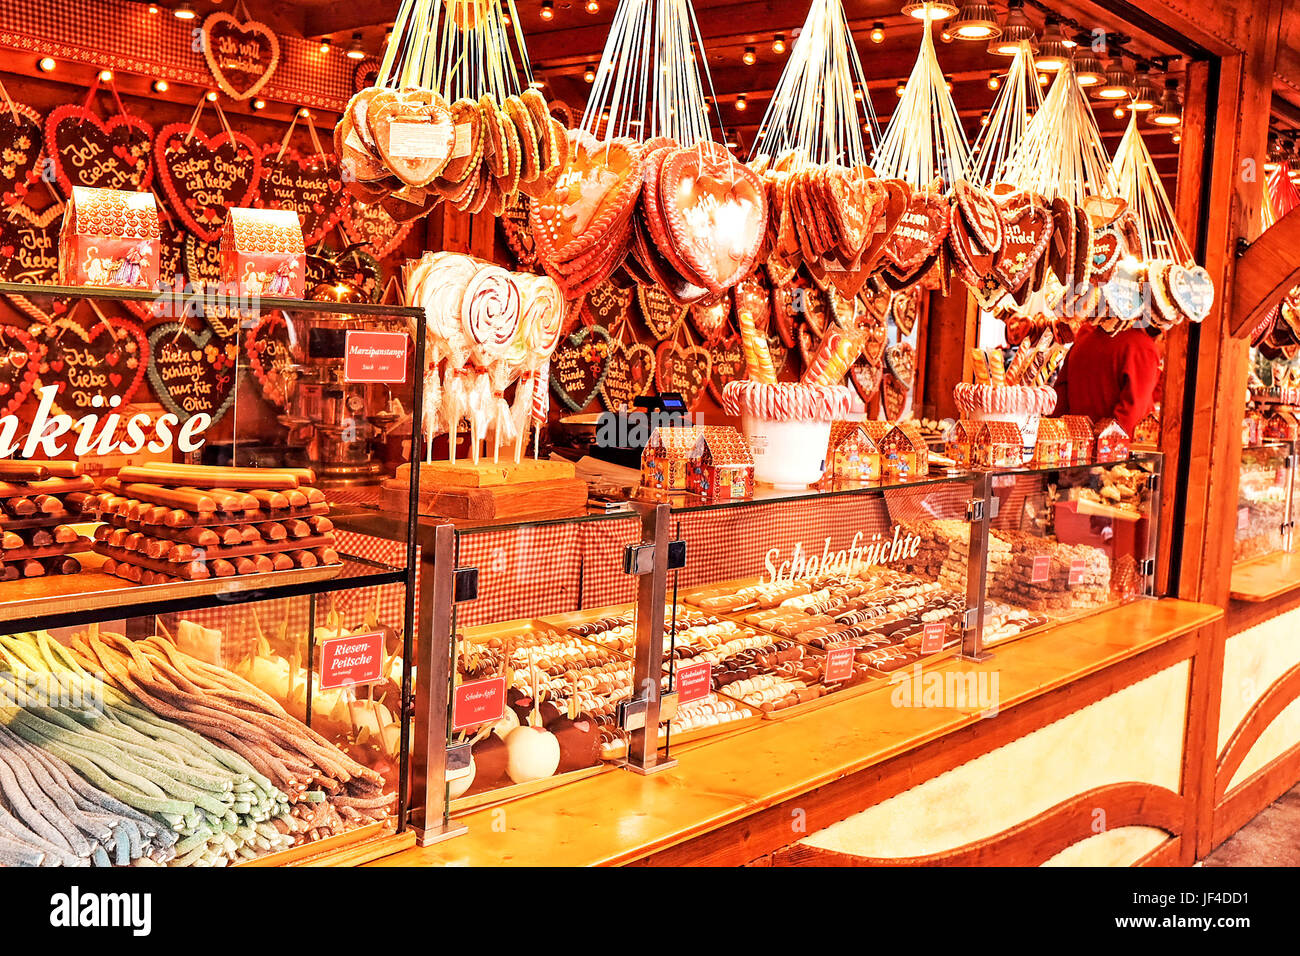 Confectionary stall at the Christmas Market in the Alexanderplatz neighborhood of Berlin, Germany Stock Photo